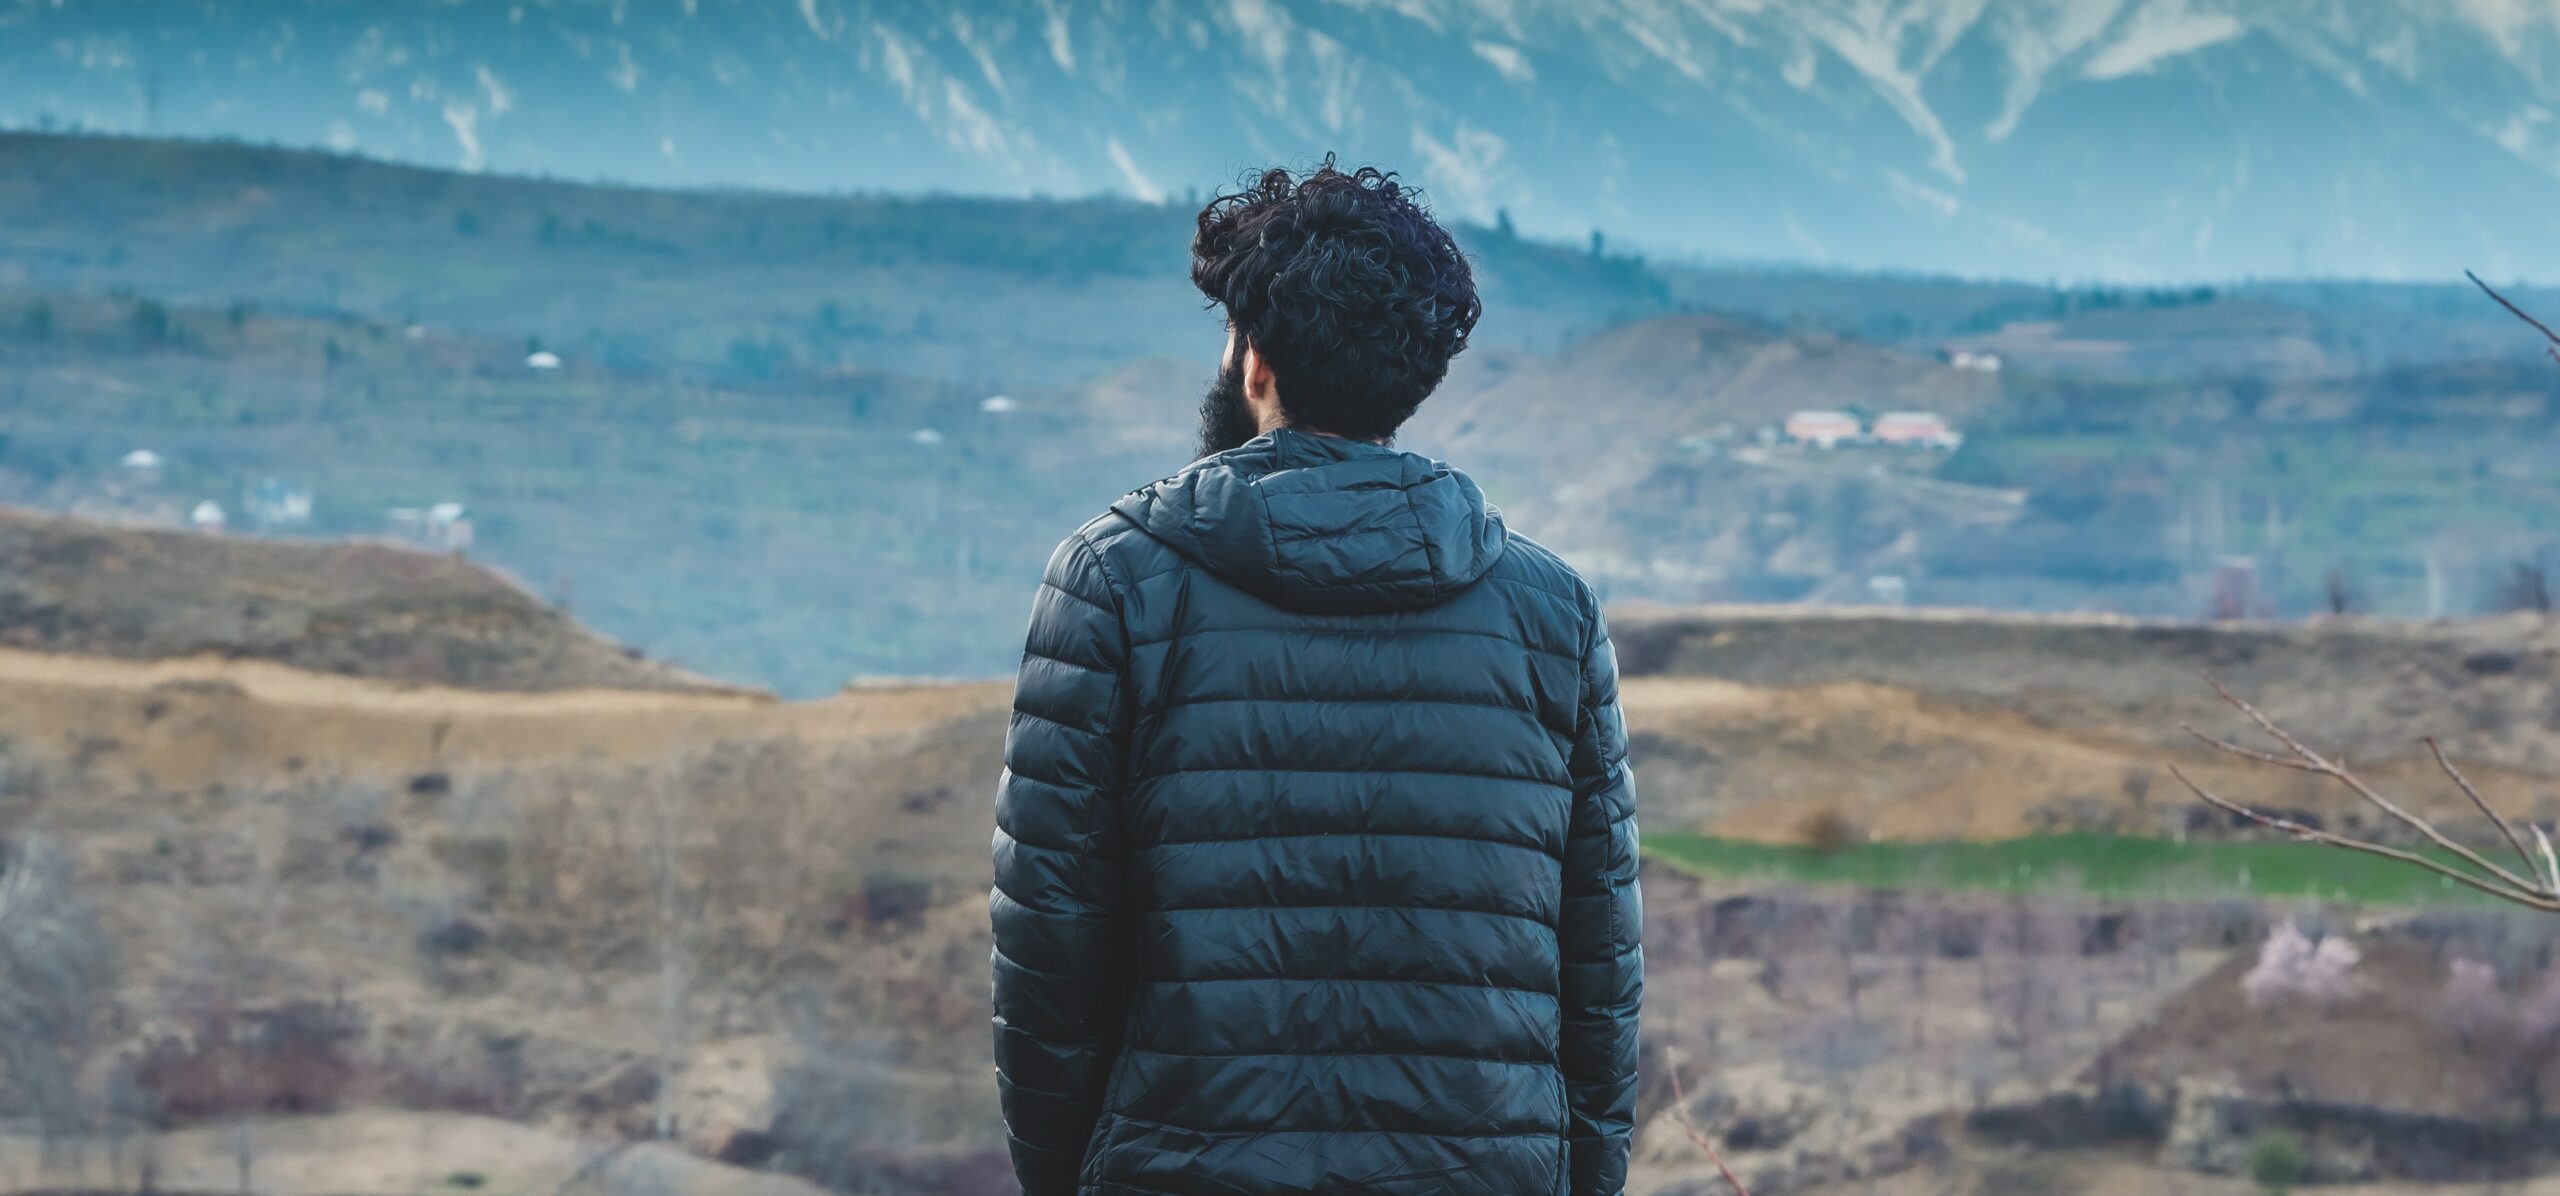 A man stands on a hill looking out at the scenery to represent the question, "what is the difference between substance abuse disorder and addiction?".